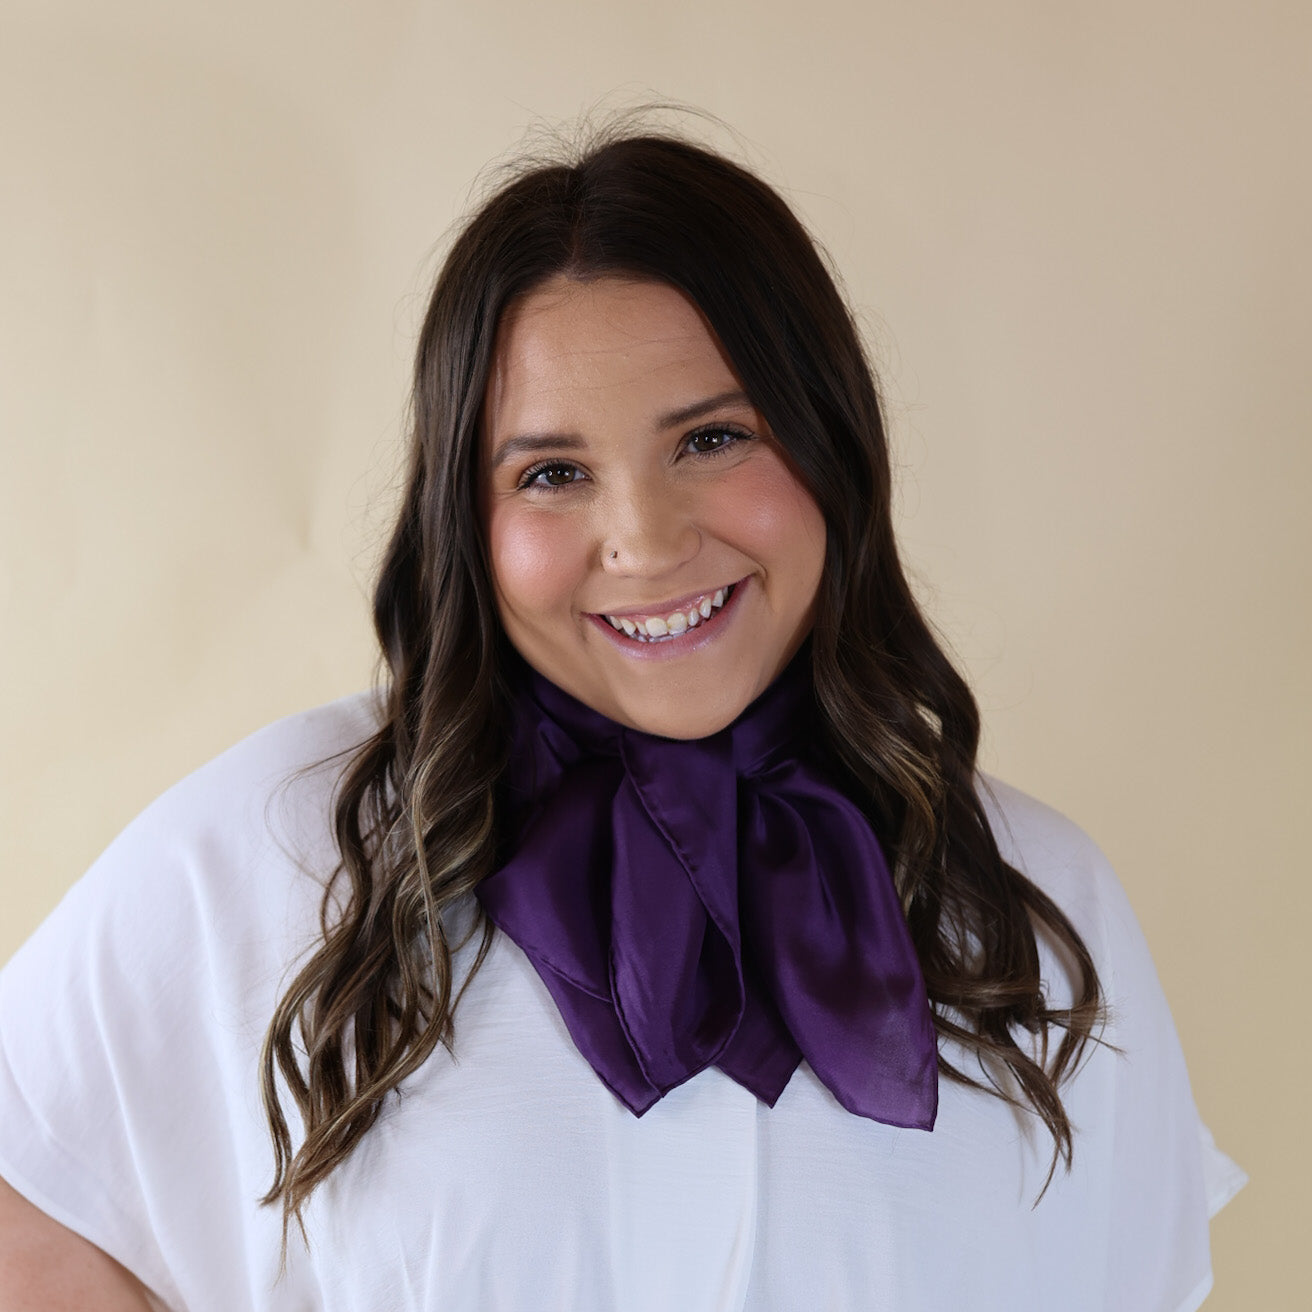 Brunette model is pictured wearing a White, Drop shoulder top with a Solid Purple scarf tied around her neck. Model is pictured in front of a beige background. 